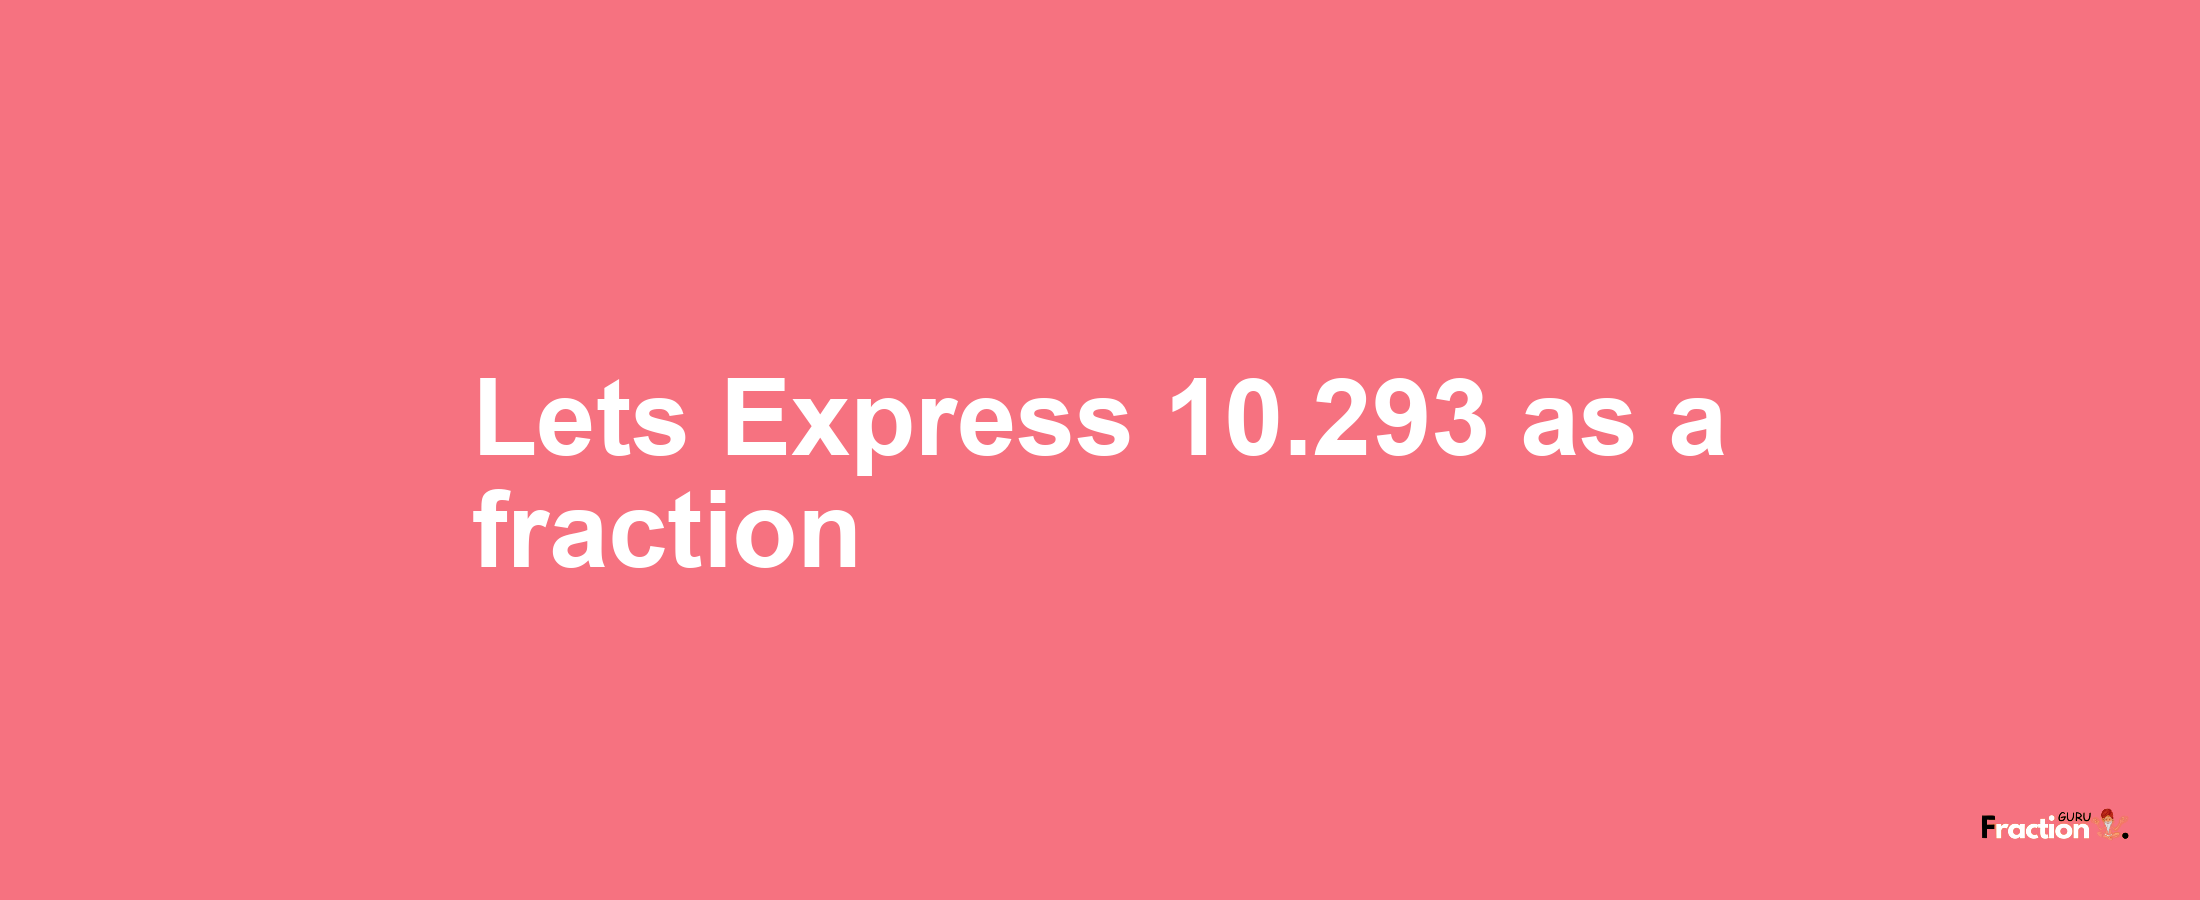 Lets Express 10.293 as afraction